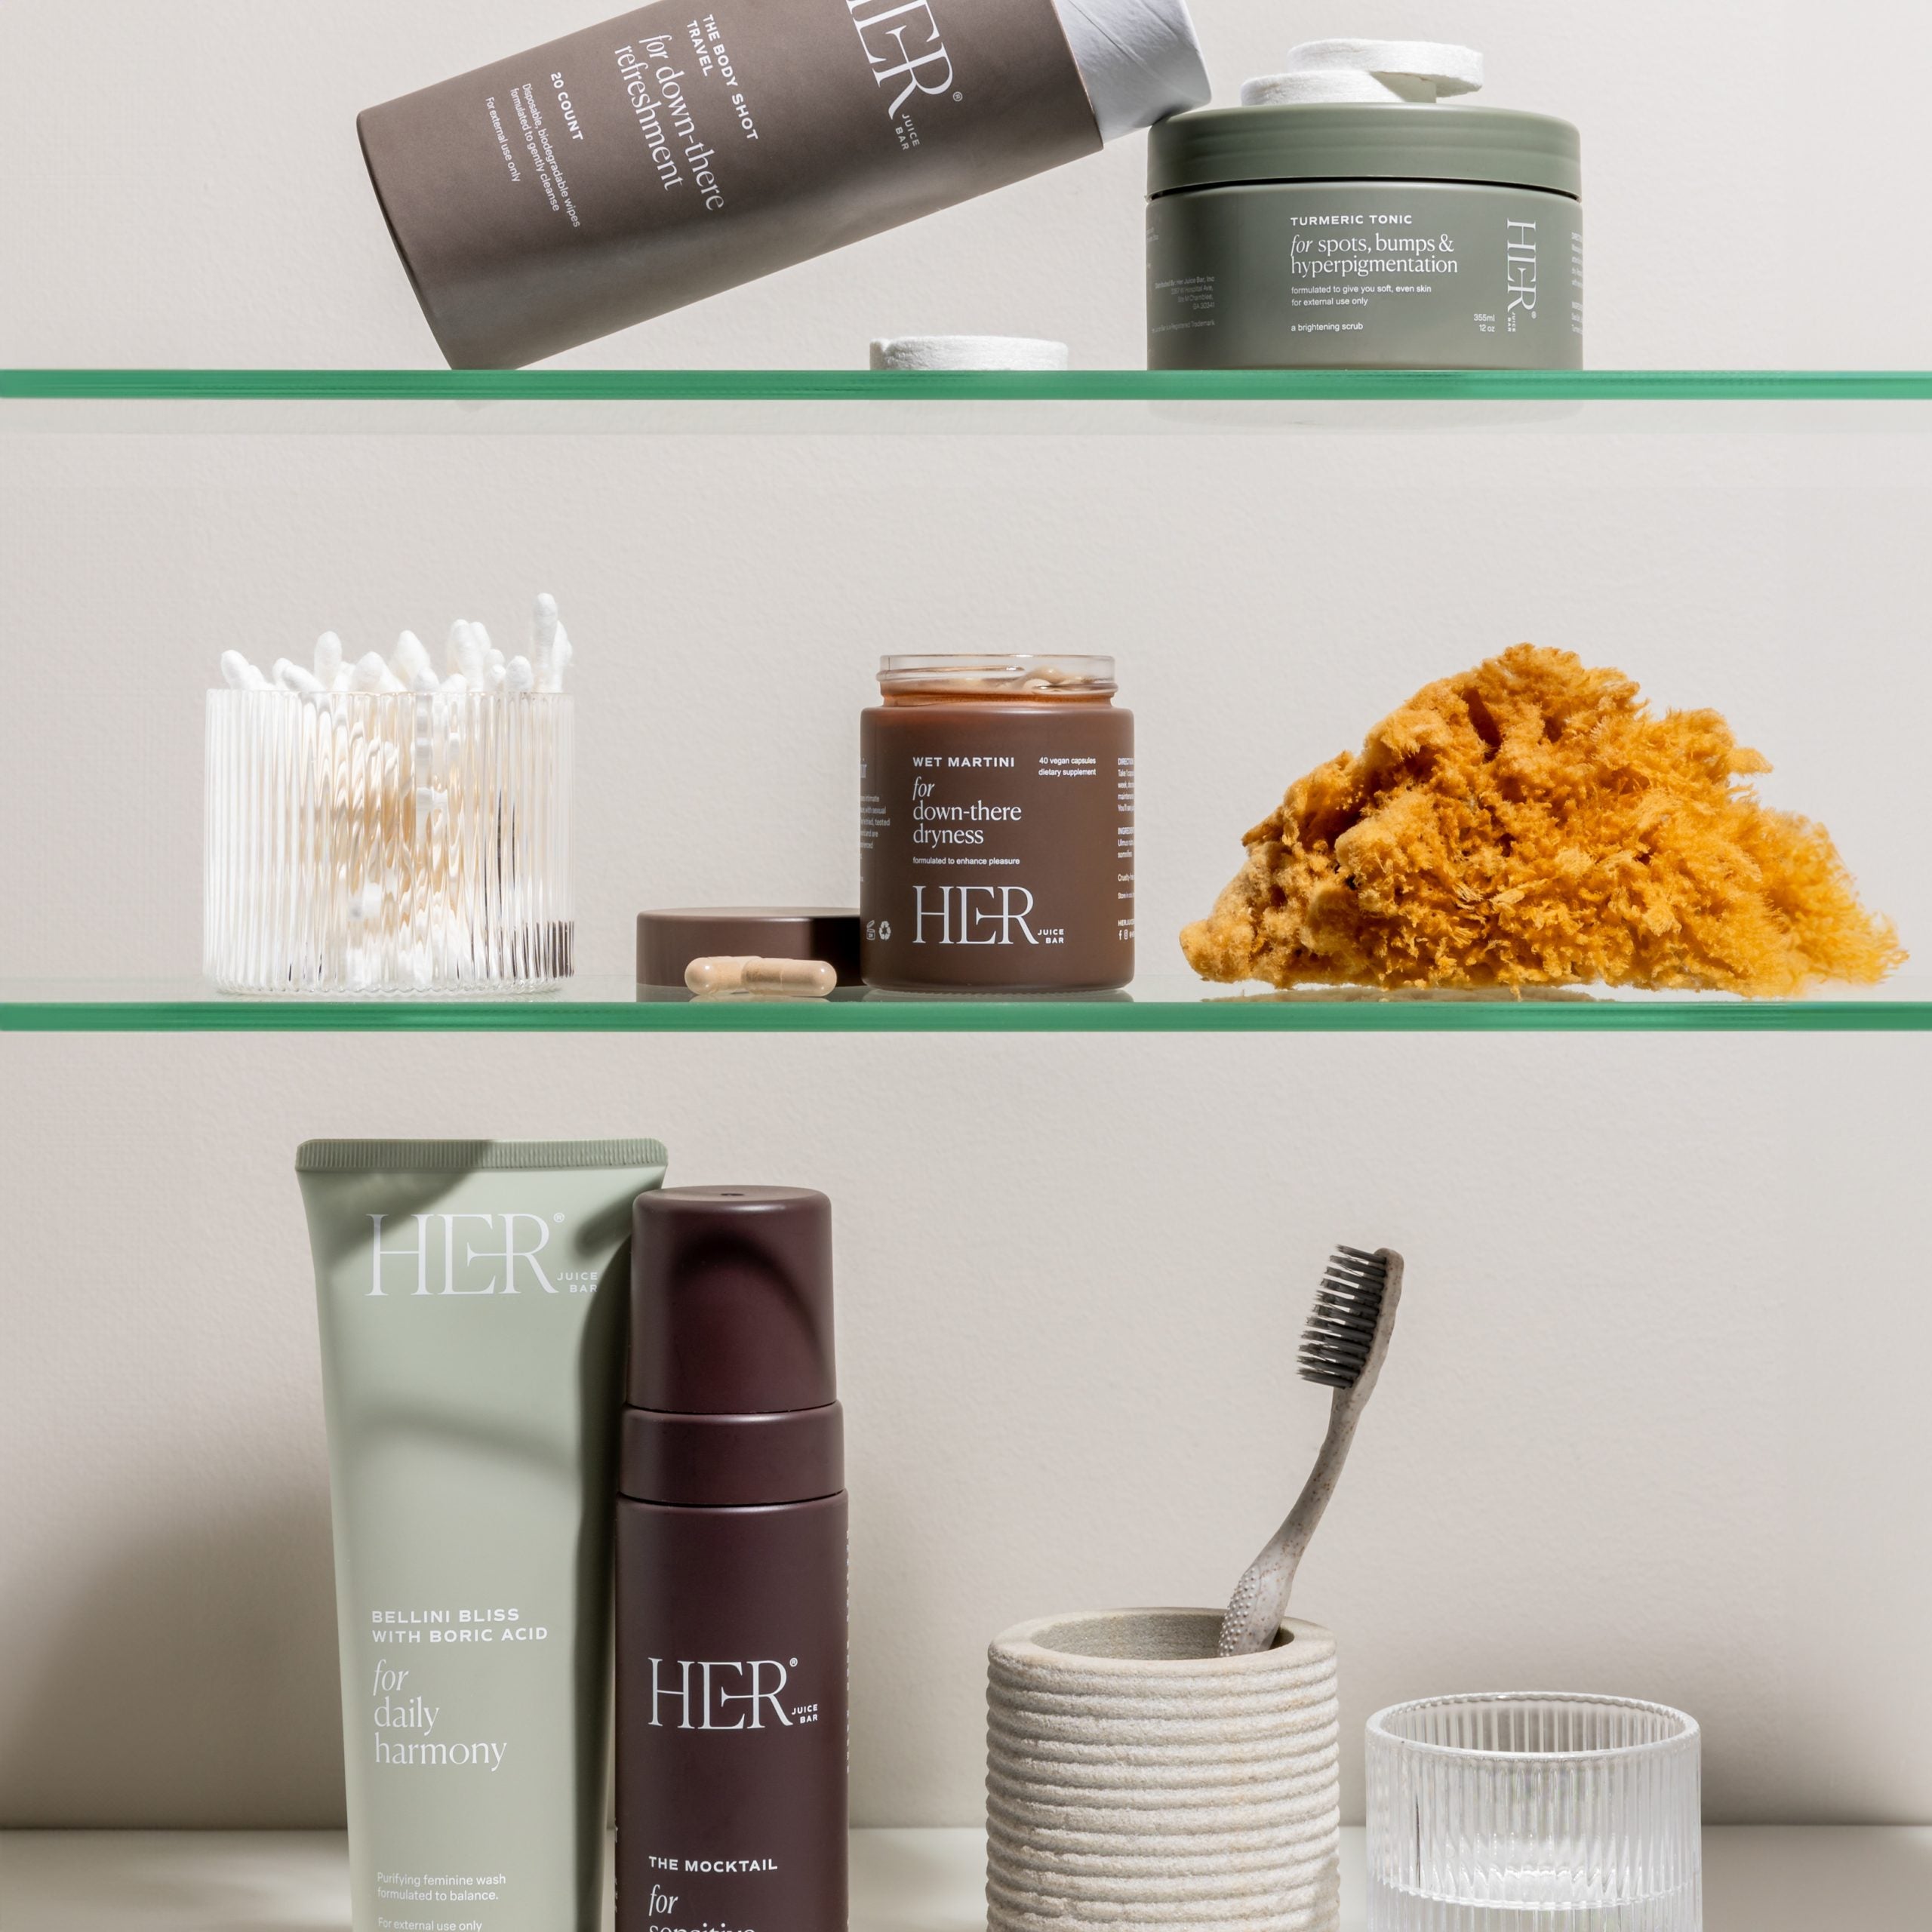 Let Her Juice Bar’s New Sensual Scrub Be Your Date Night Asset